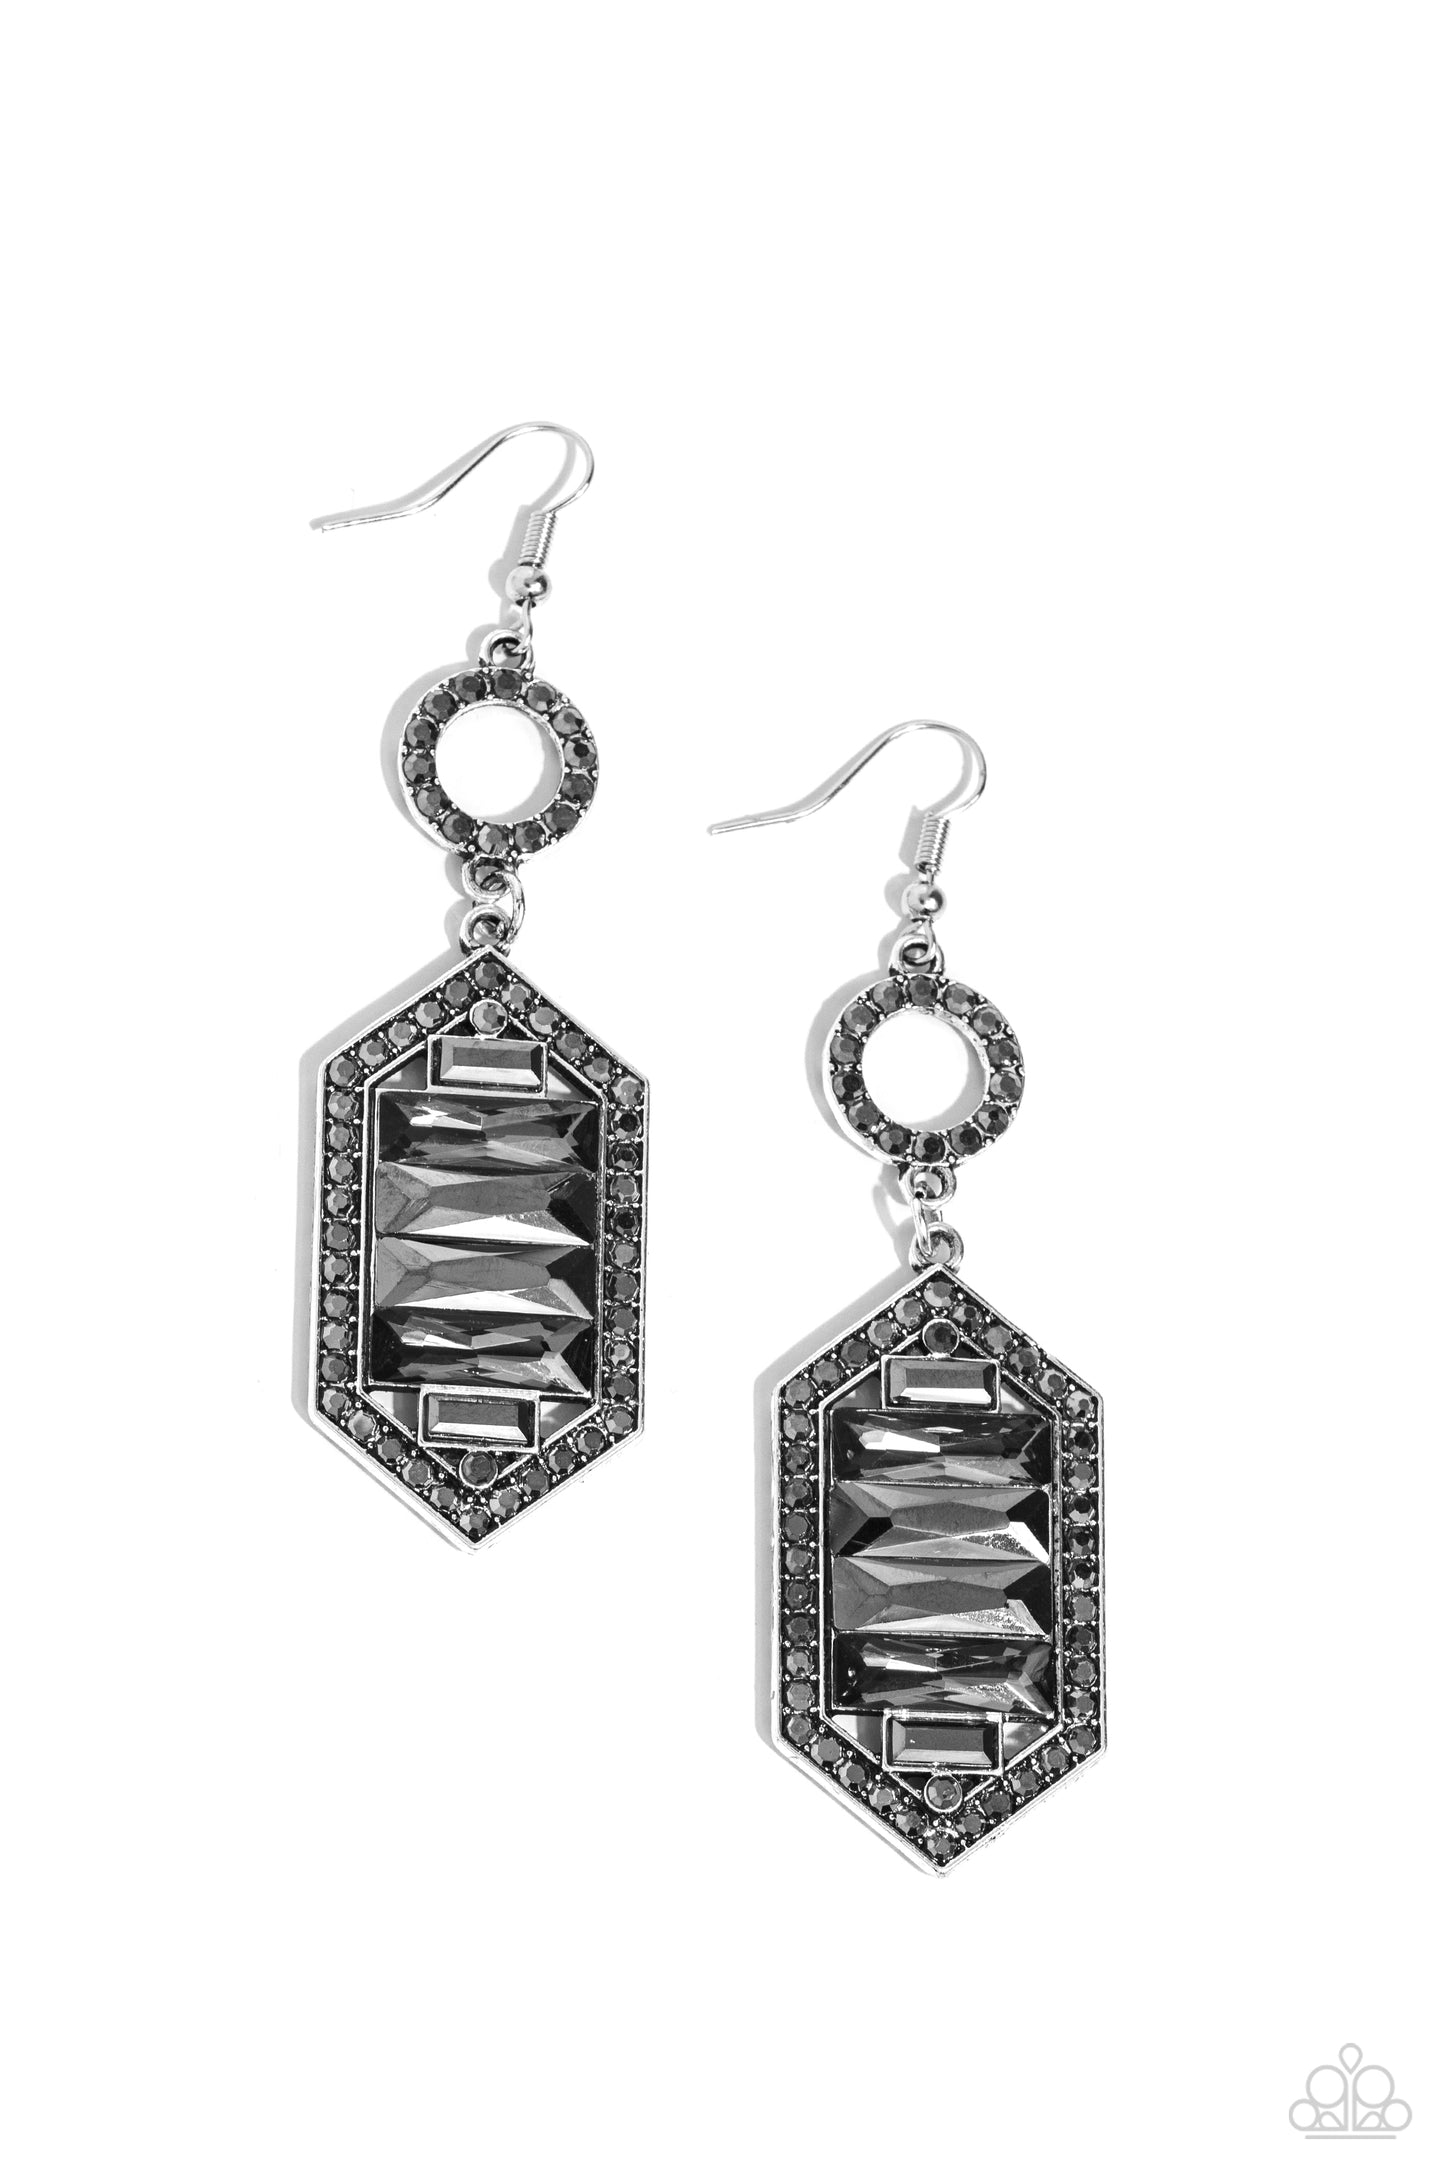 Combustible Craving - silver - Paparazzi earrings